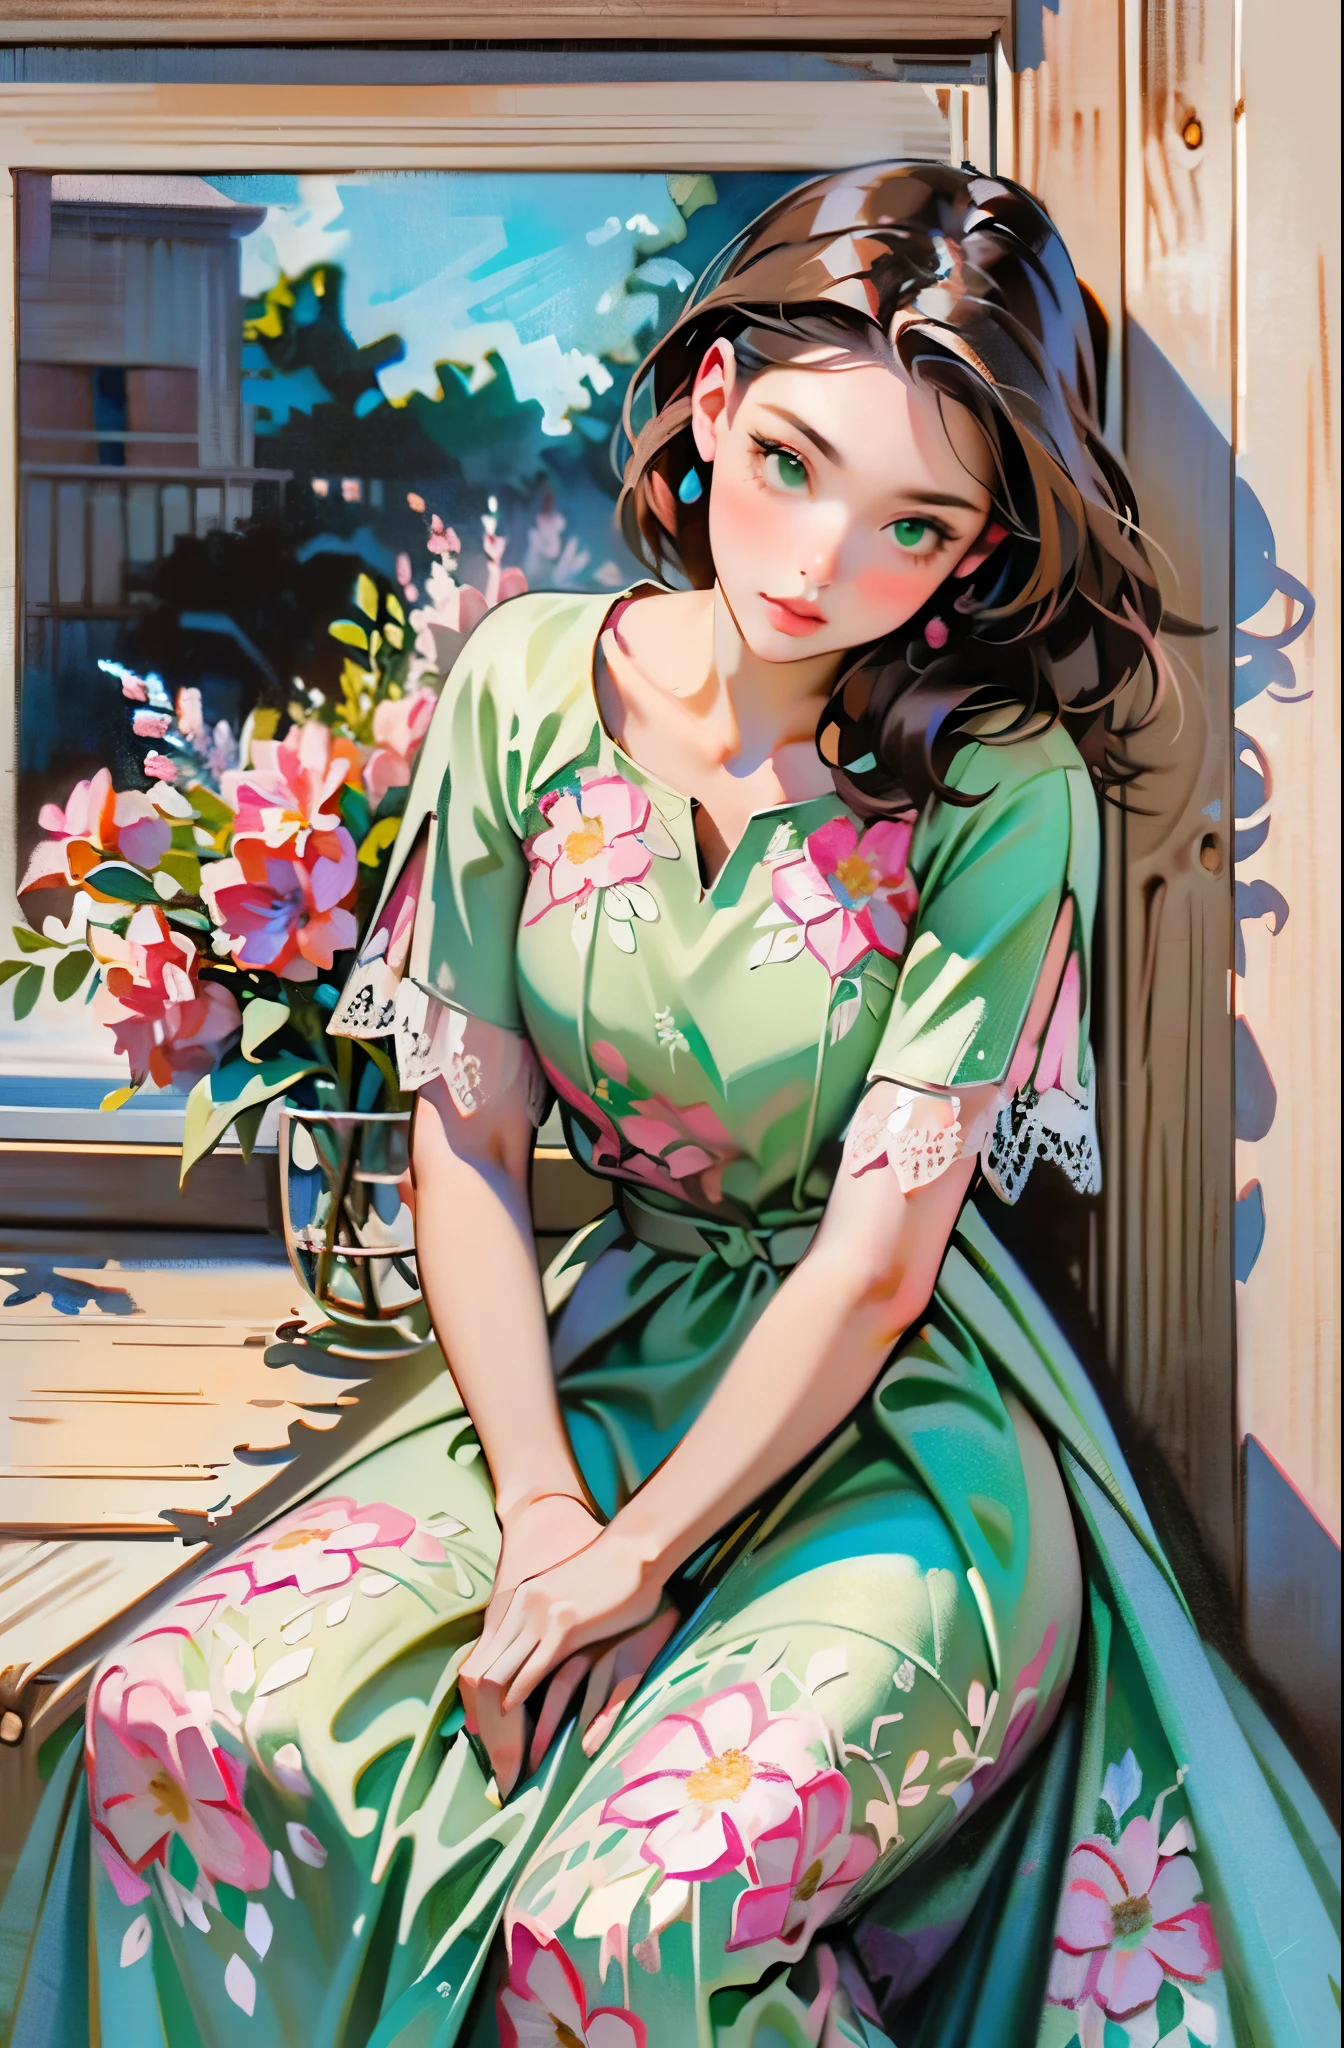 (Impresionism1:1.0) soft pastel palette (white, pink, red, green, brown) watercolor (pensive pretty Young woman long brown hair in a floral print dress lace edges 1.0) (sitting on a stone door step leaning against an old brown wooden door 1.0).